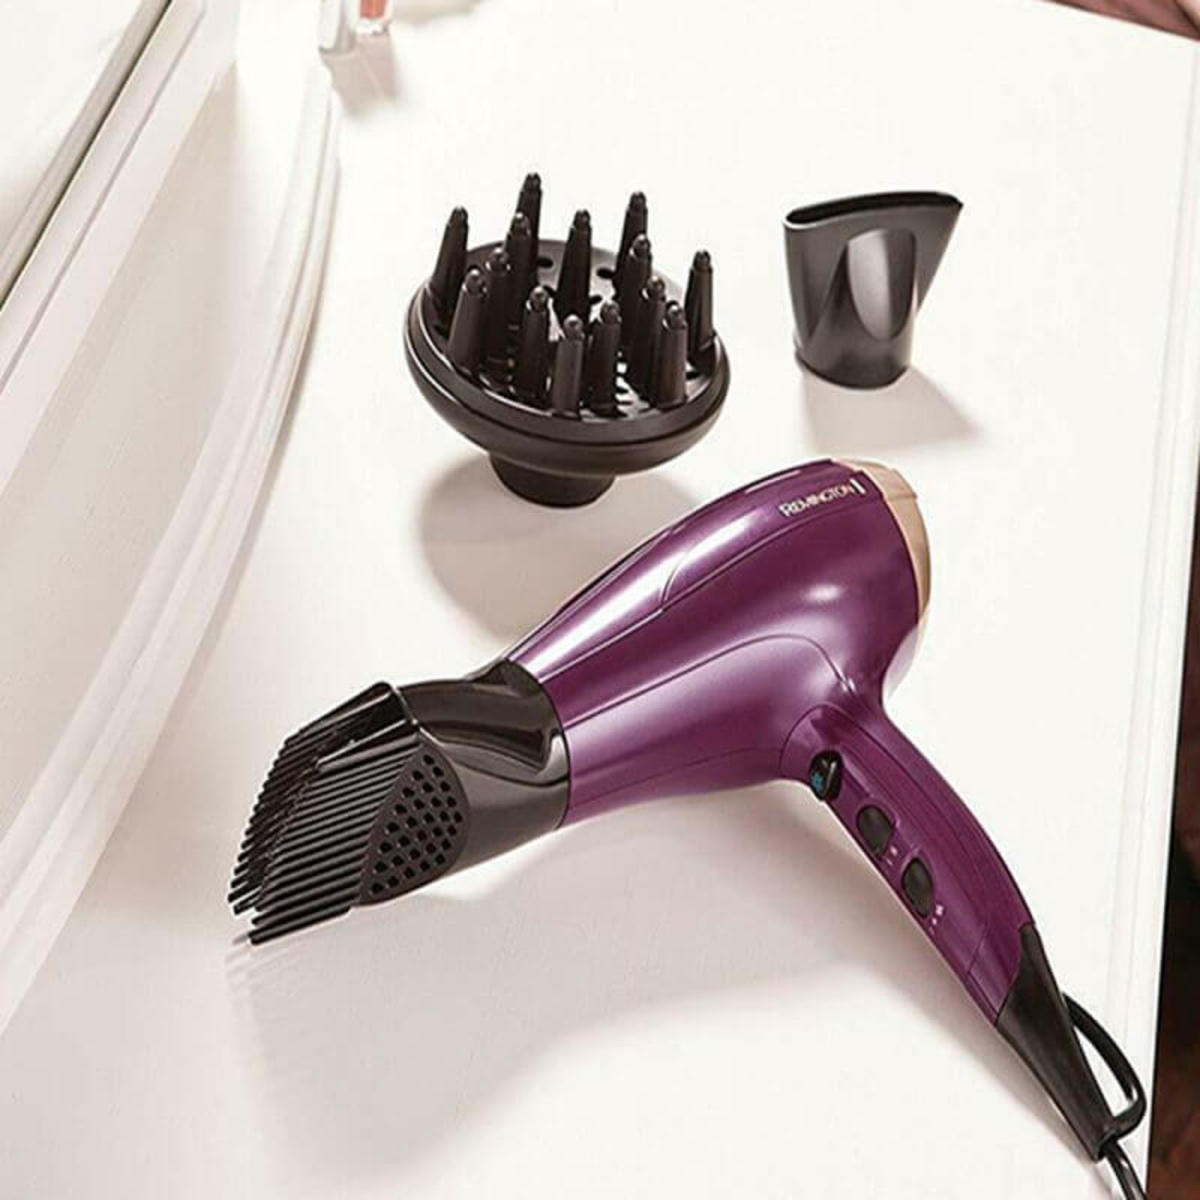 REMINGTON D5219-Hair Dryer-Style Spin Curl Kit 2300W